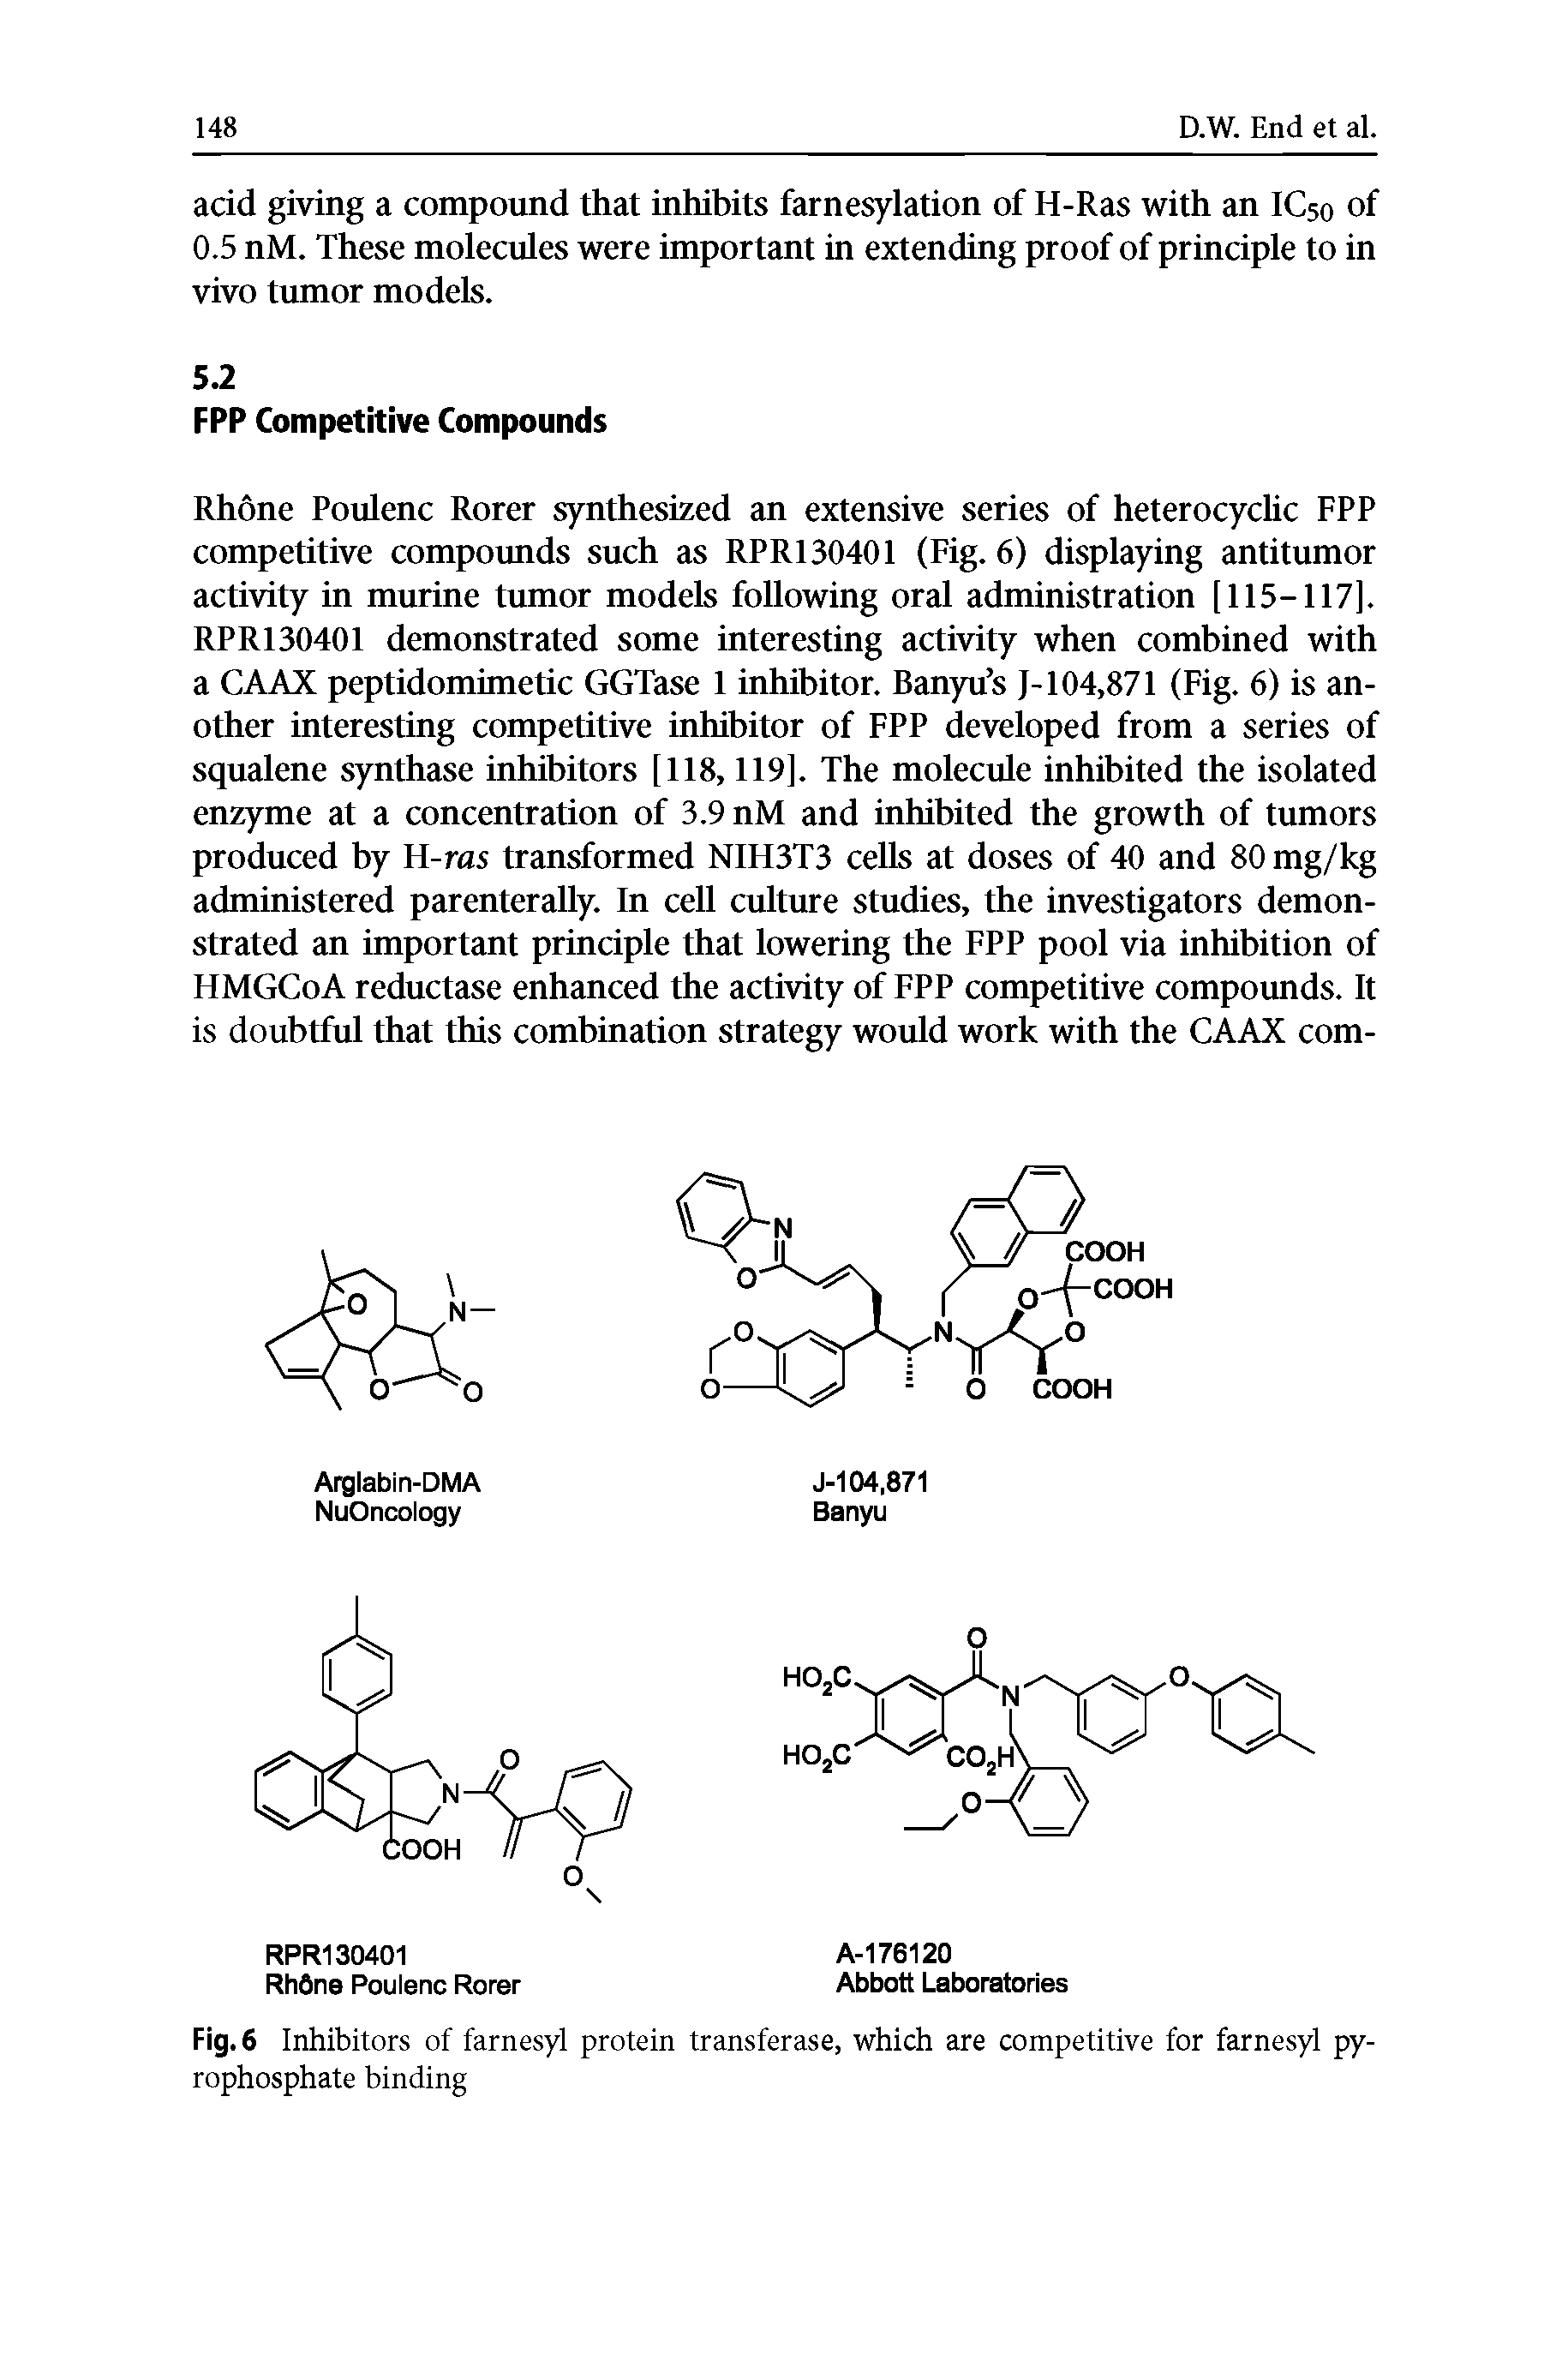 Fig. 6 Inhibitors of farnesyl protein transferase, which are competitive for farnesyl pyrophosphate binding...